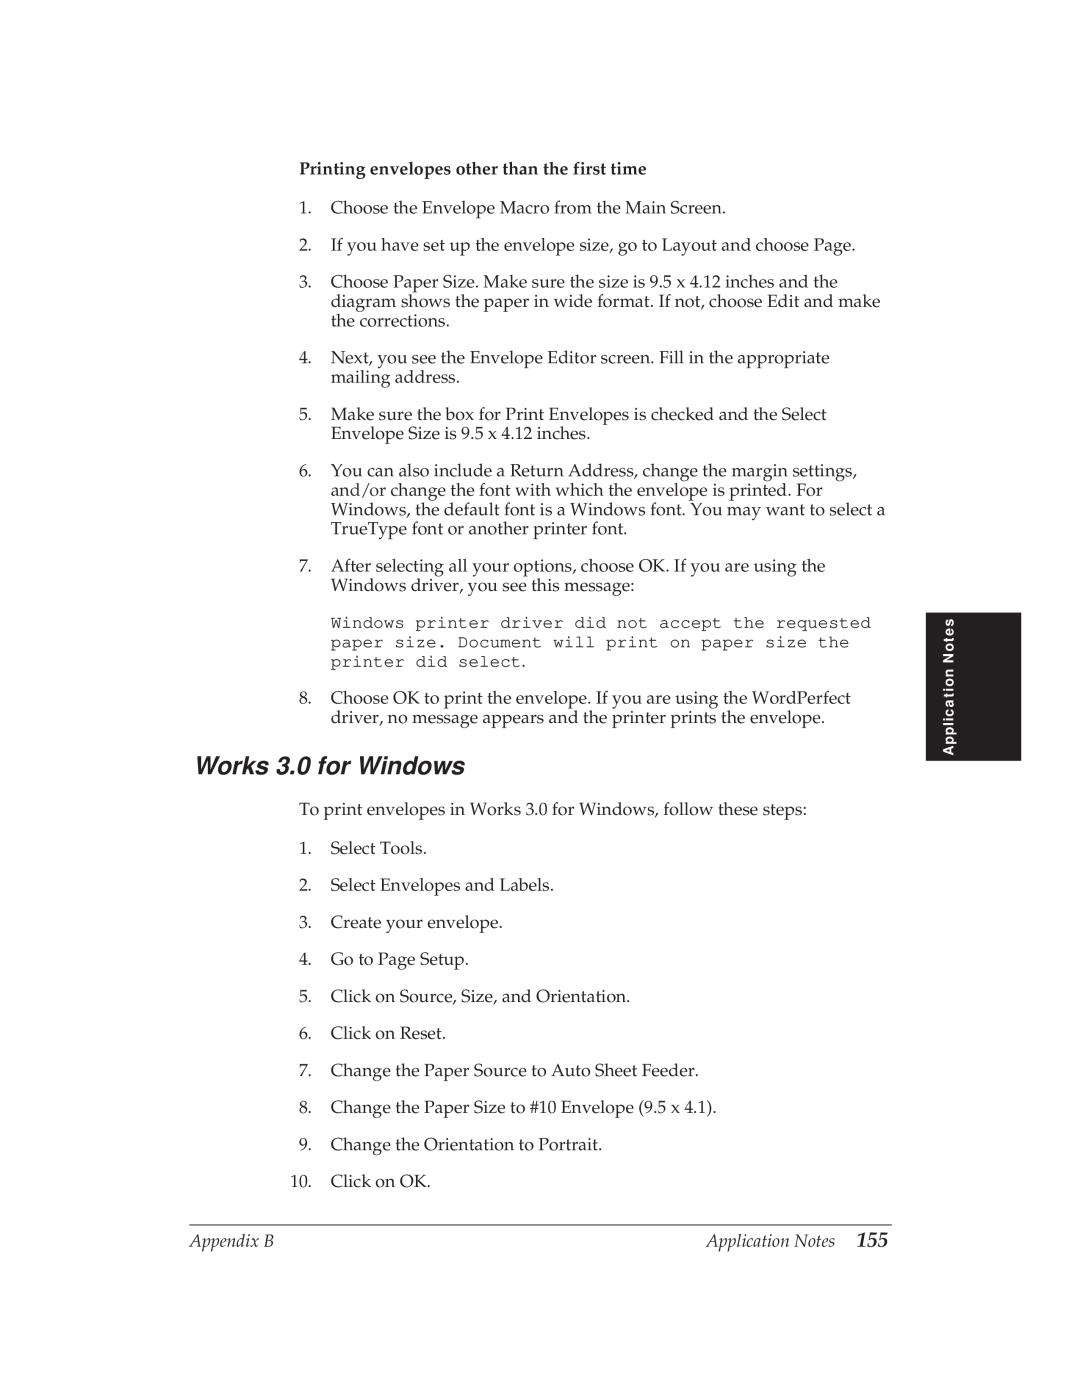 Canon BJ-30 manual Works 3.0 for Windows, Printing envelopes other than the first time 